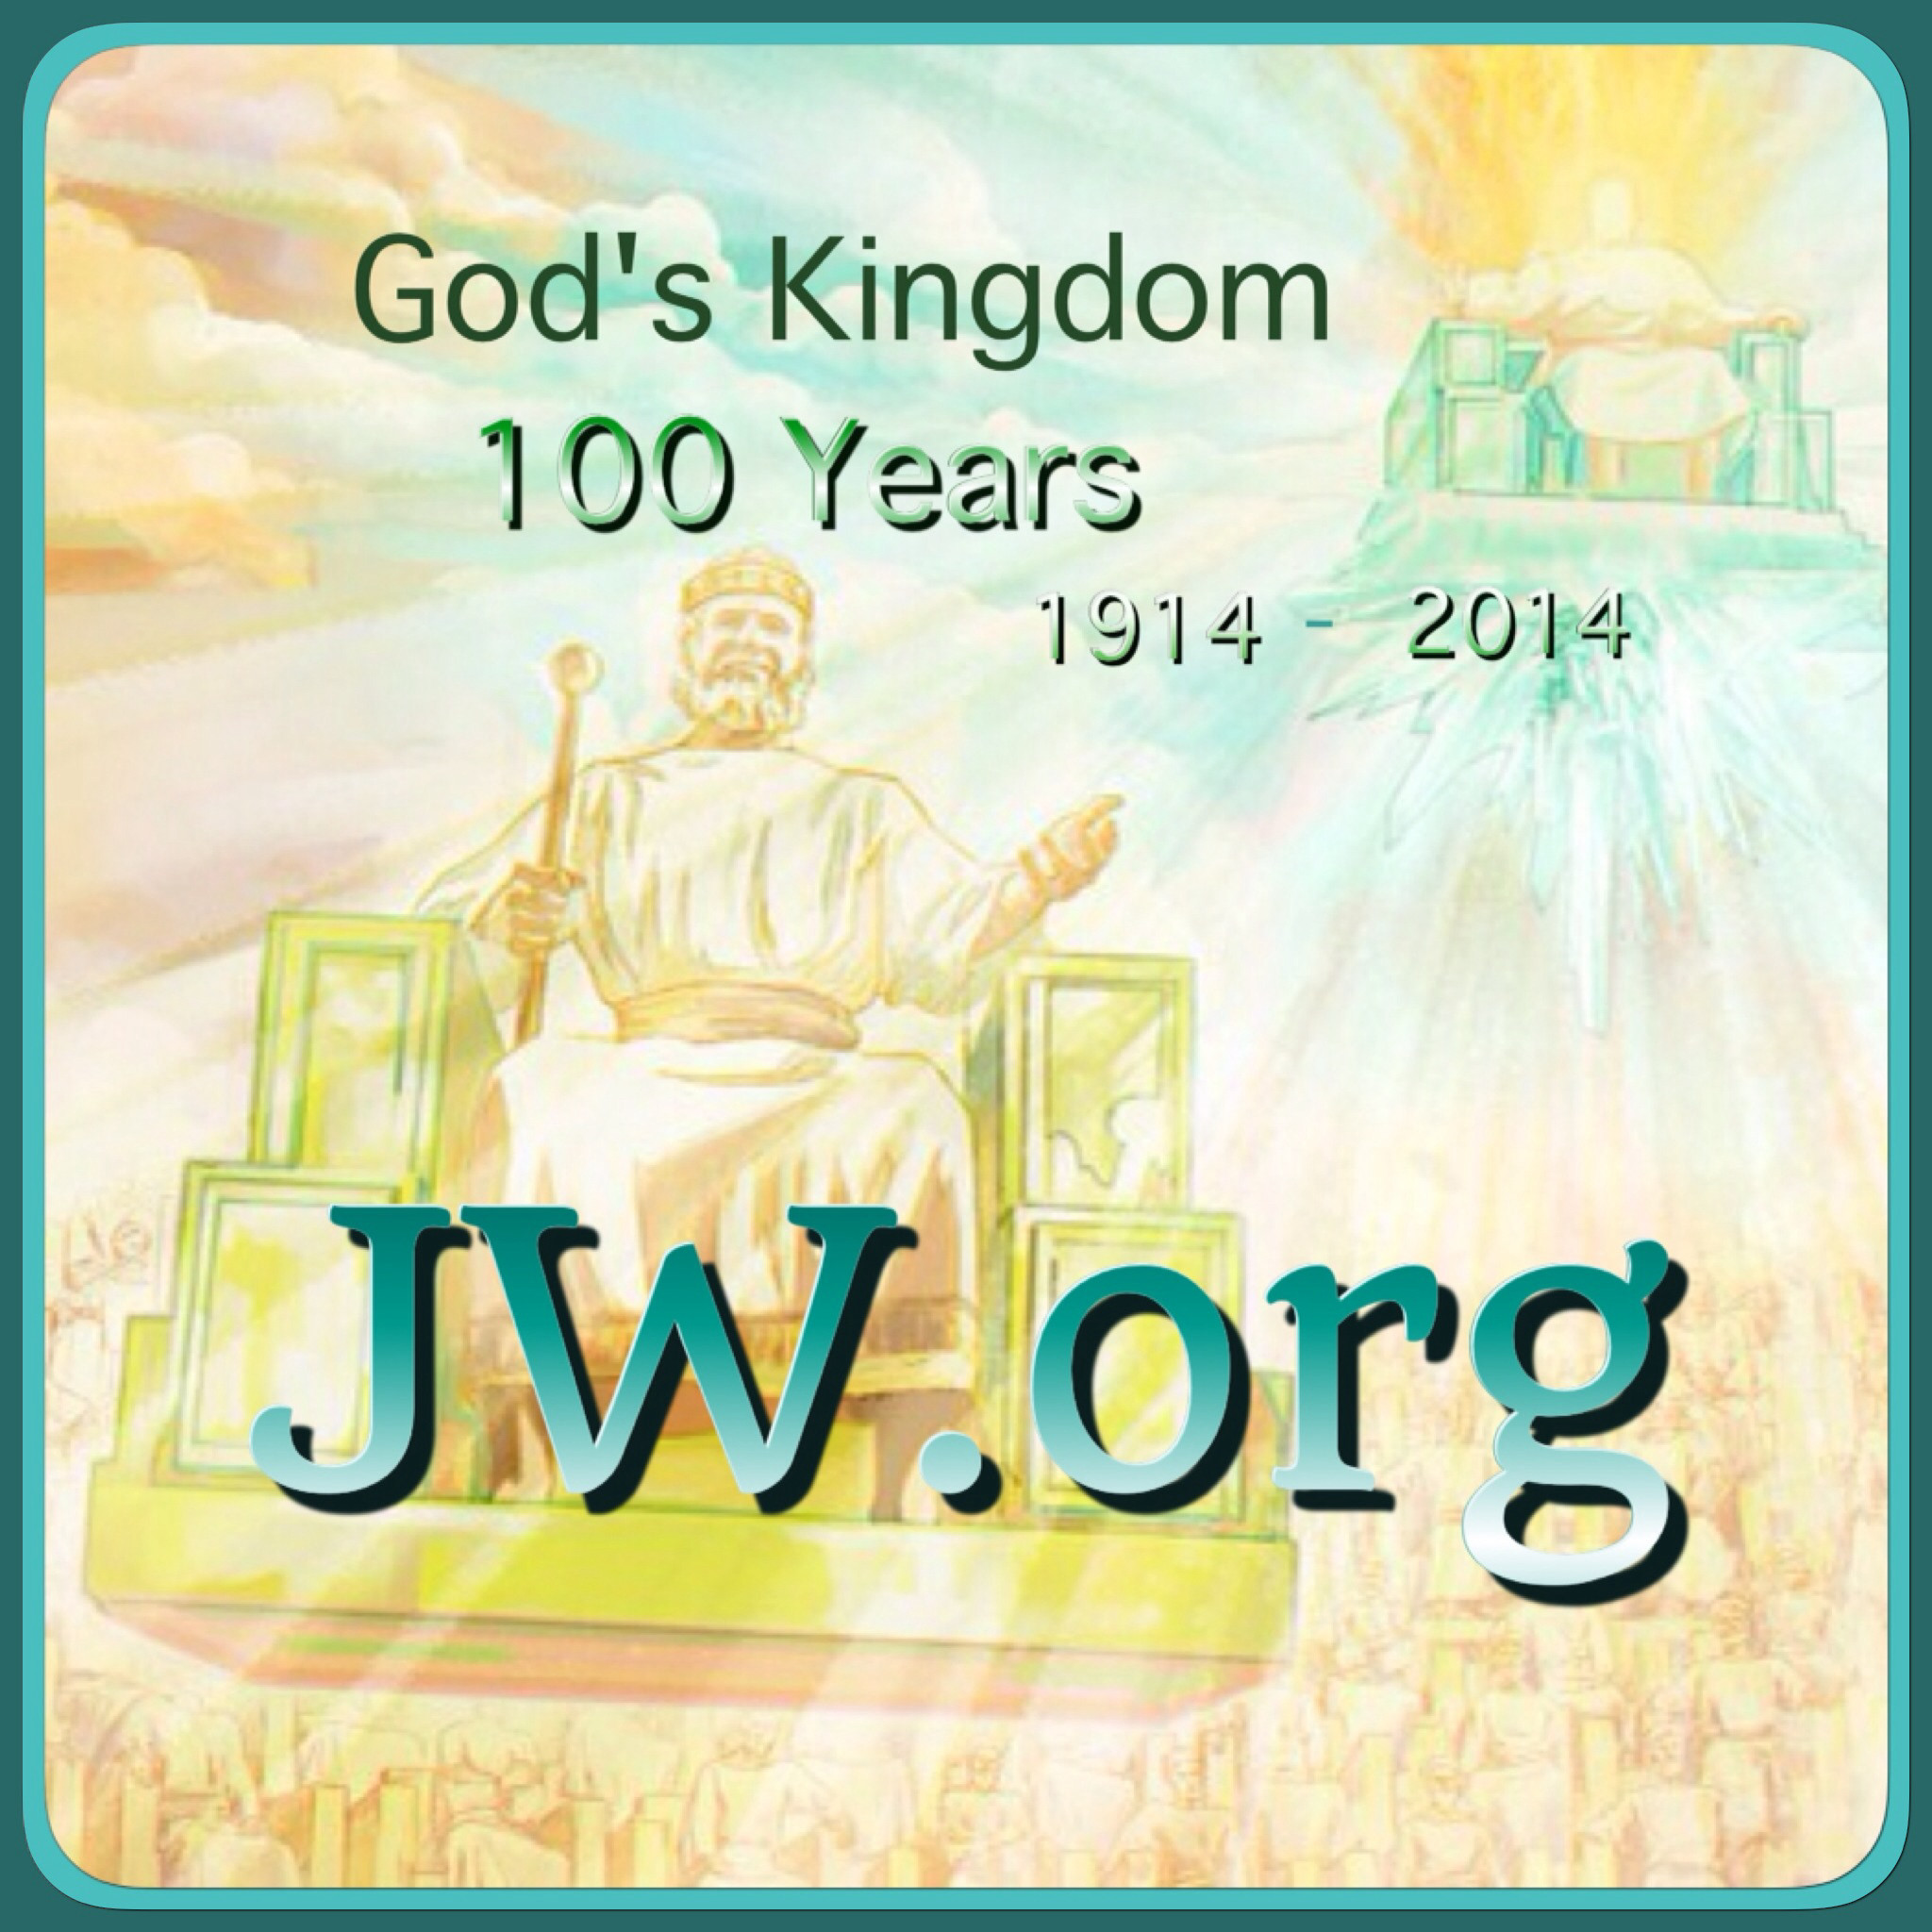 2048x2048 JW-org-has-the-Bible-in-languages-ASL-